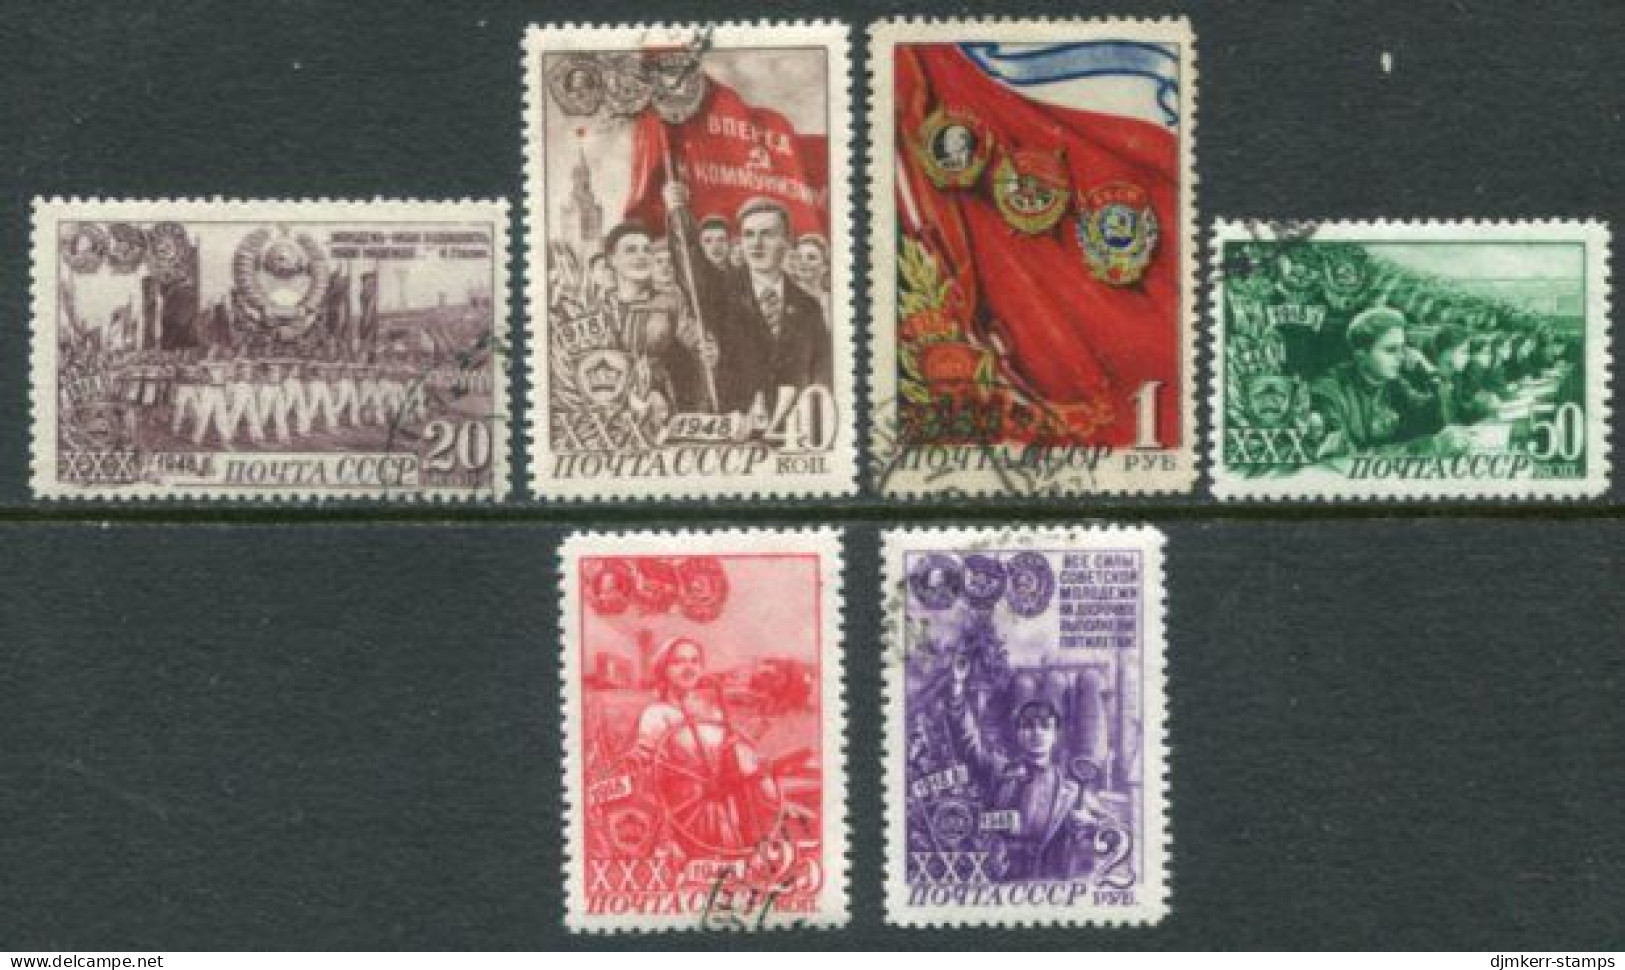 SOVIET UNION 1948 30th Anniversary Of Young Communist League Set Used.  Michel 1280-85 - Gebraucht